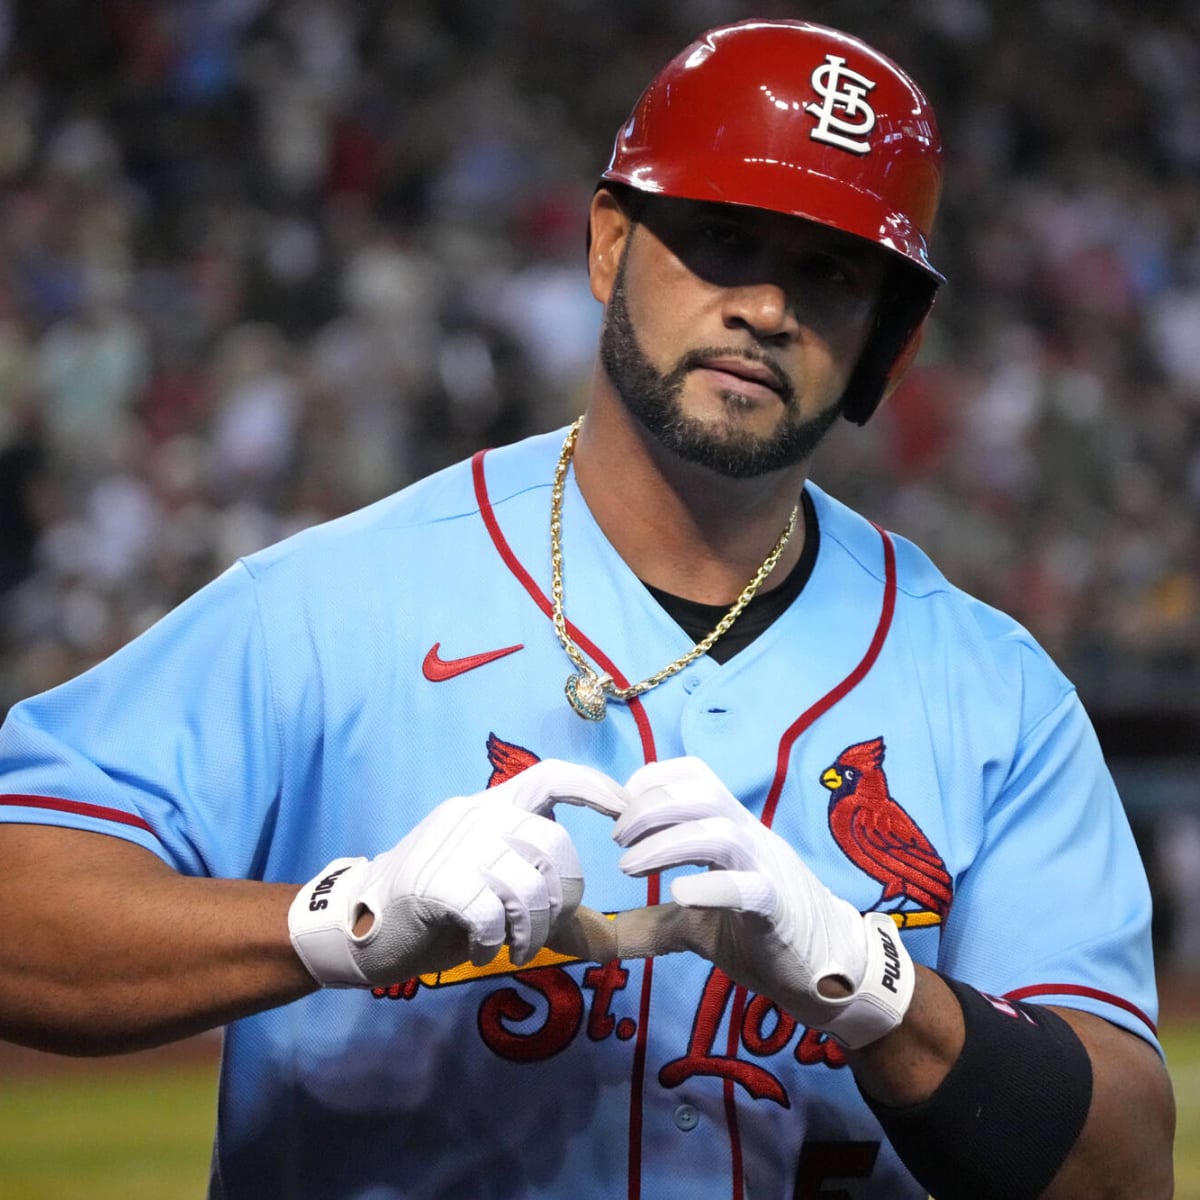 Pujols makes incredible gesture, gives young fan jersey off his